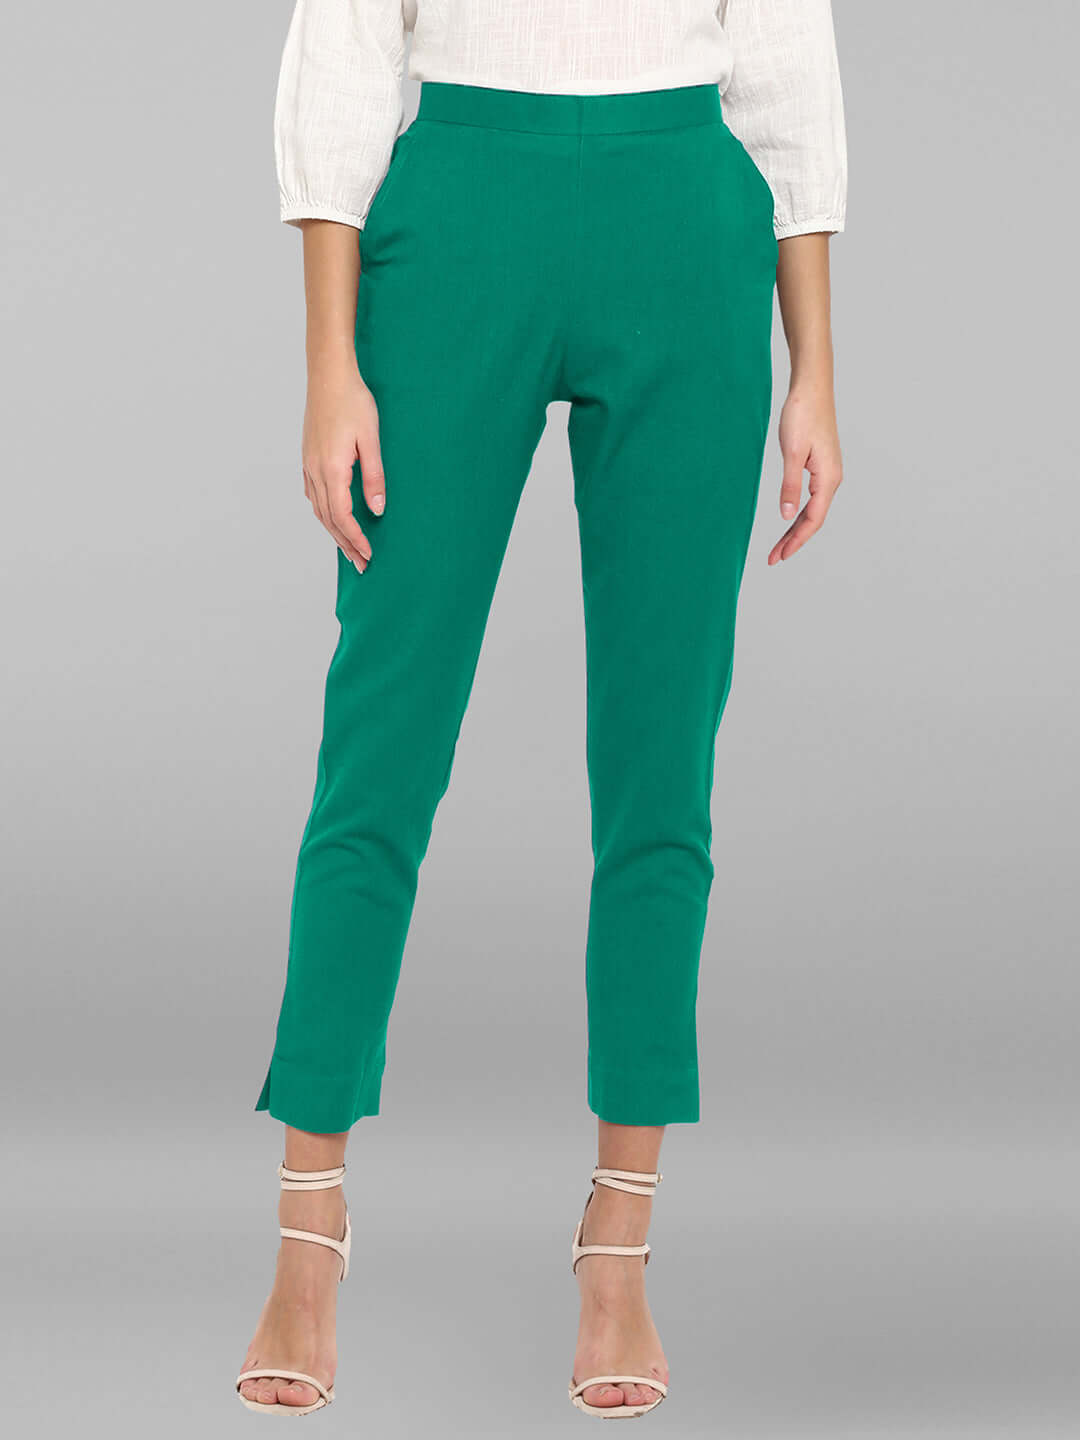 Teal Green Cotton Solid Casual Pant